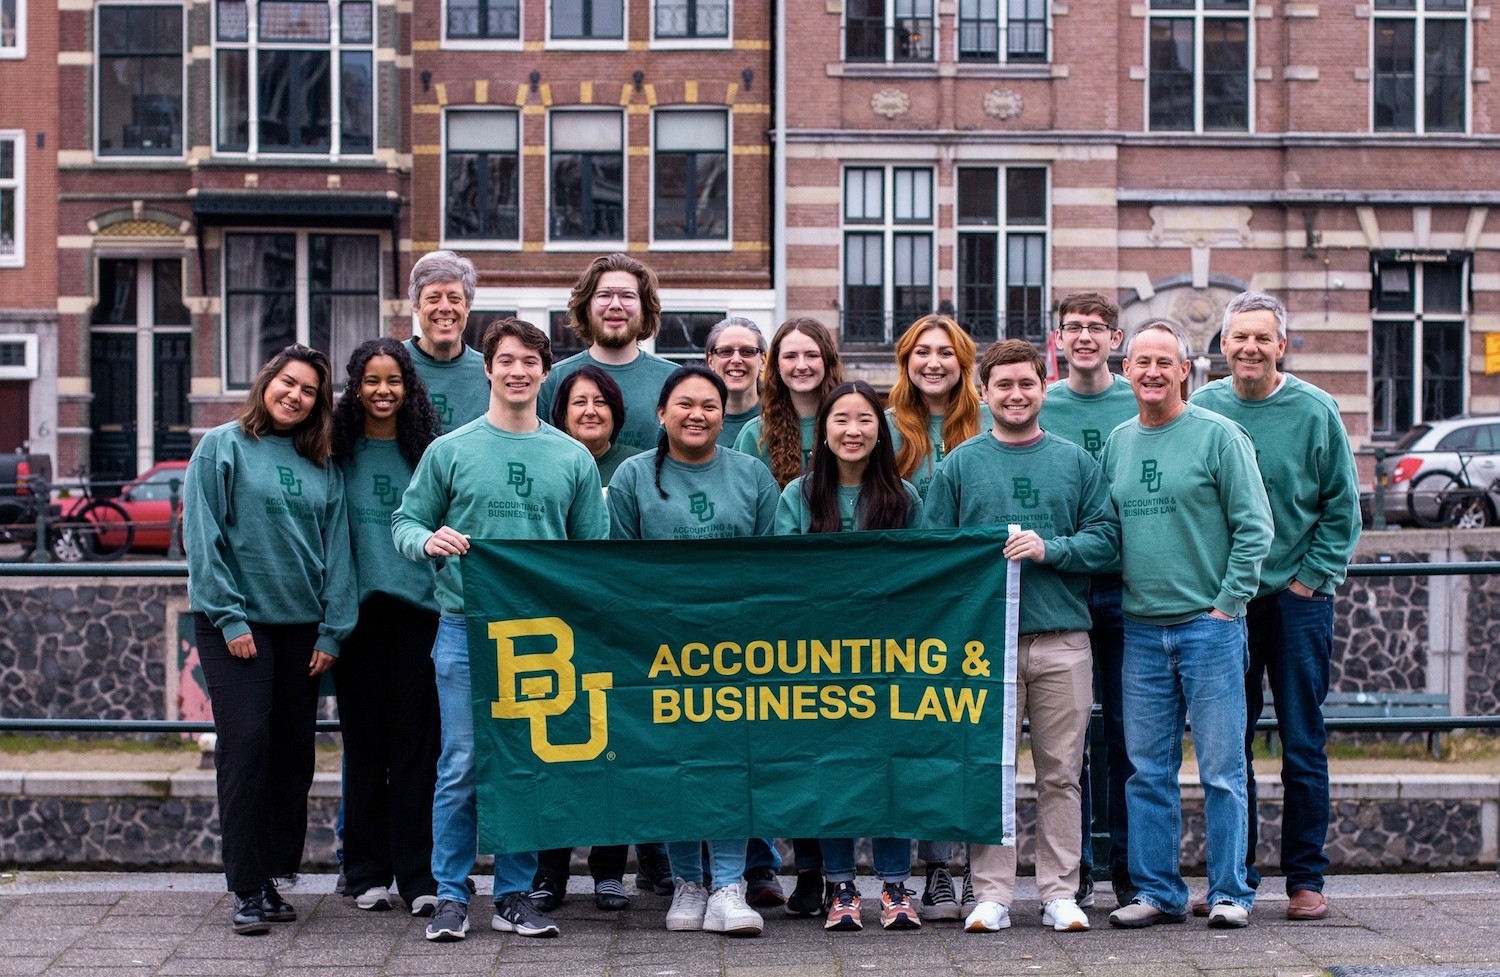 Accounting and Business Law mission trip in Amsterdam